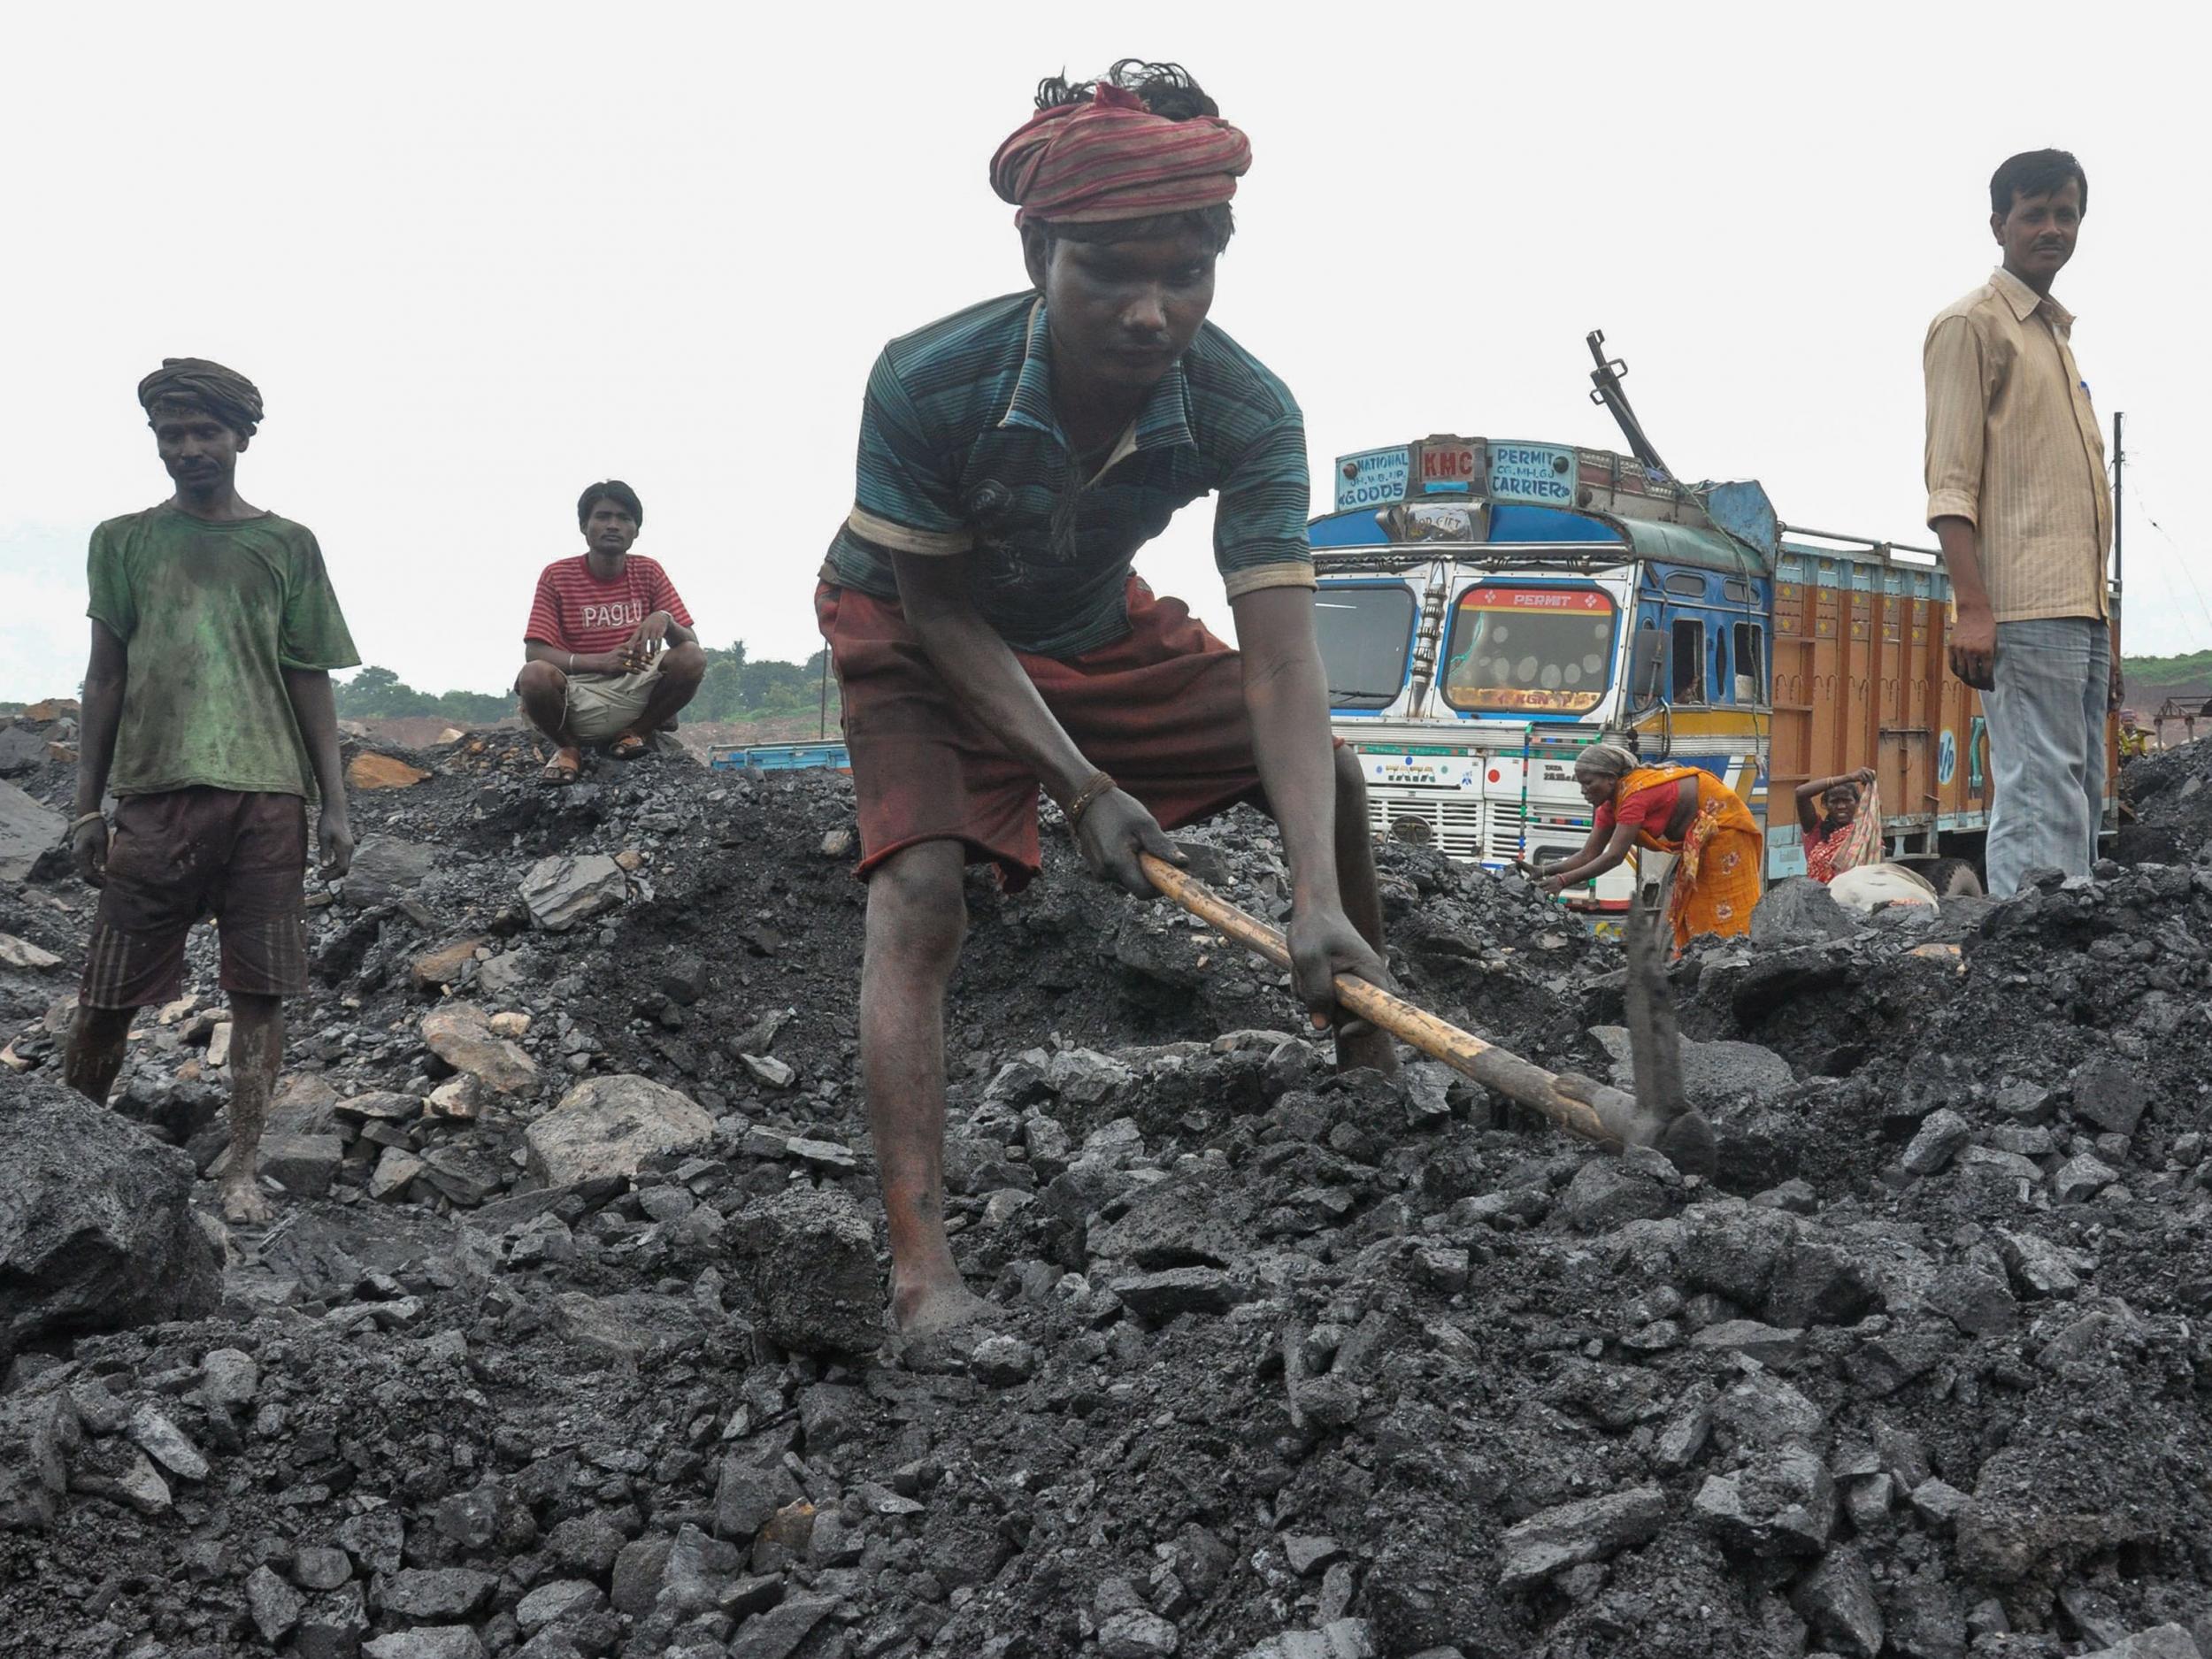 India is expected to see an increase in coal demand of 4 per cent each year until 2023